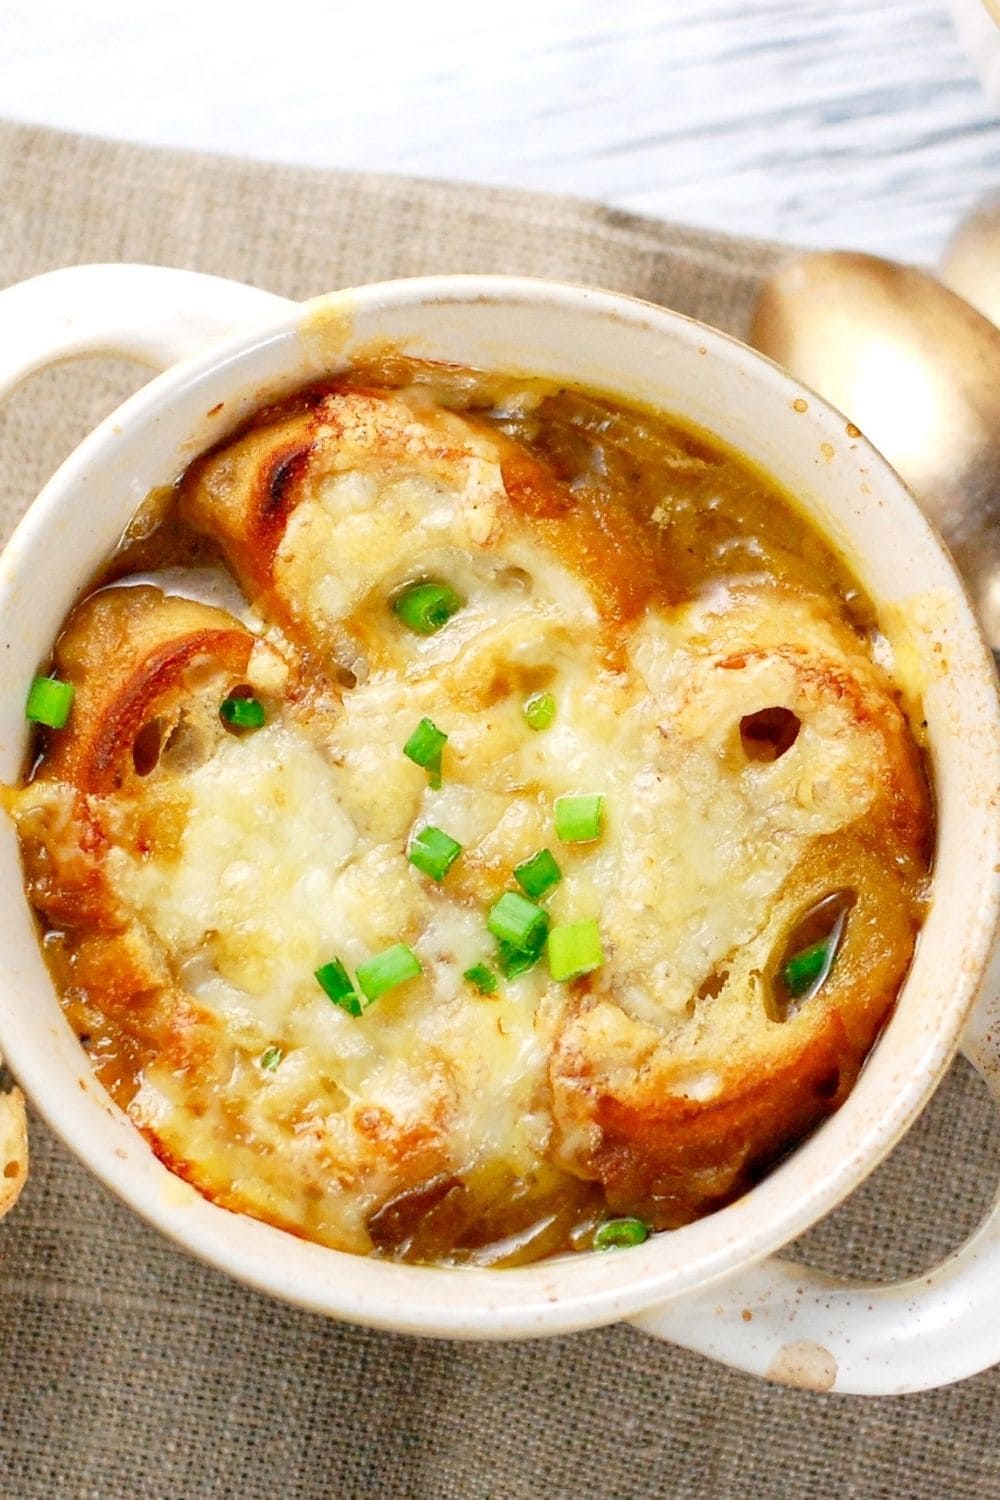 Bowl of homemade Julia Child’s French Onion Soup